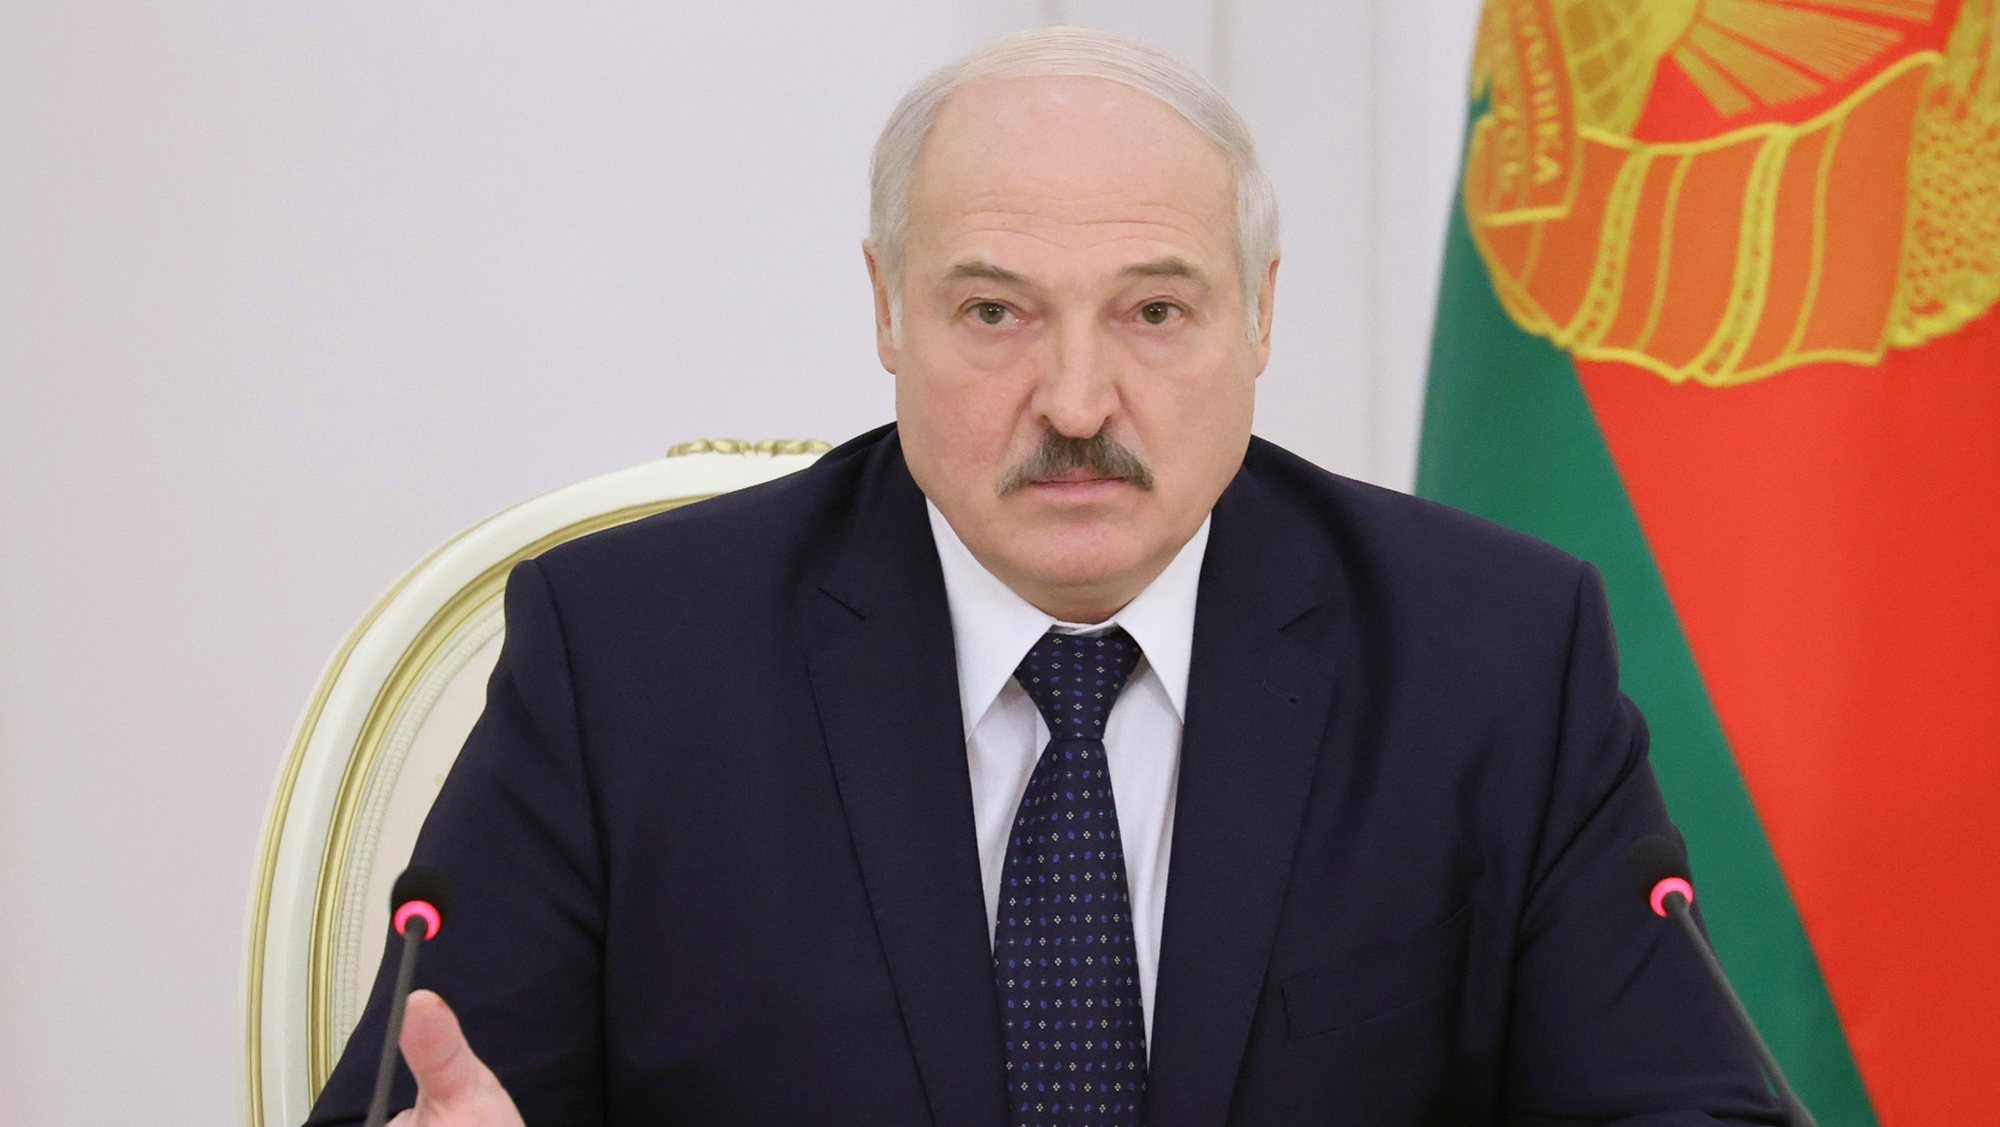 epa09318612 (FILE) Belarusian President Alexander Lukashenko talks during a meeting for economy assessment for 2020 and a draft forecast documents for 2021 in Minsk, Belarus, 07 December 2020 (reissued 02 July 2021). President Lukashenko on 02 July 2021, during a solemn meeting marking the Independence day, has ordered to close the border with Ukraine to prevent the significant incursion of weapons from Ukraine to Belarus, according to Belarusian state news agency Belta.  EPA/MAXIM GUCHEK/ POOL MANDATORY CREDIT *** Local Caption *** 56548158